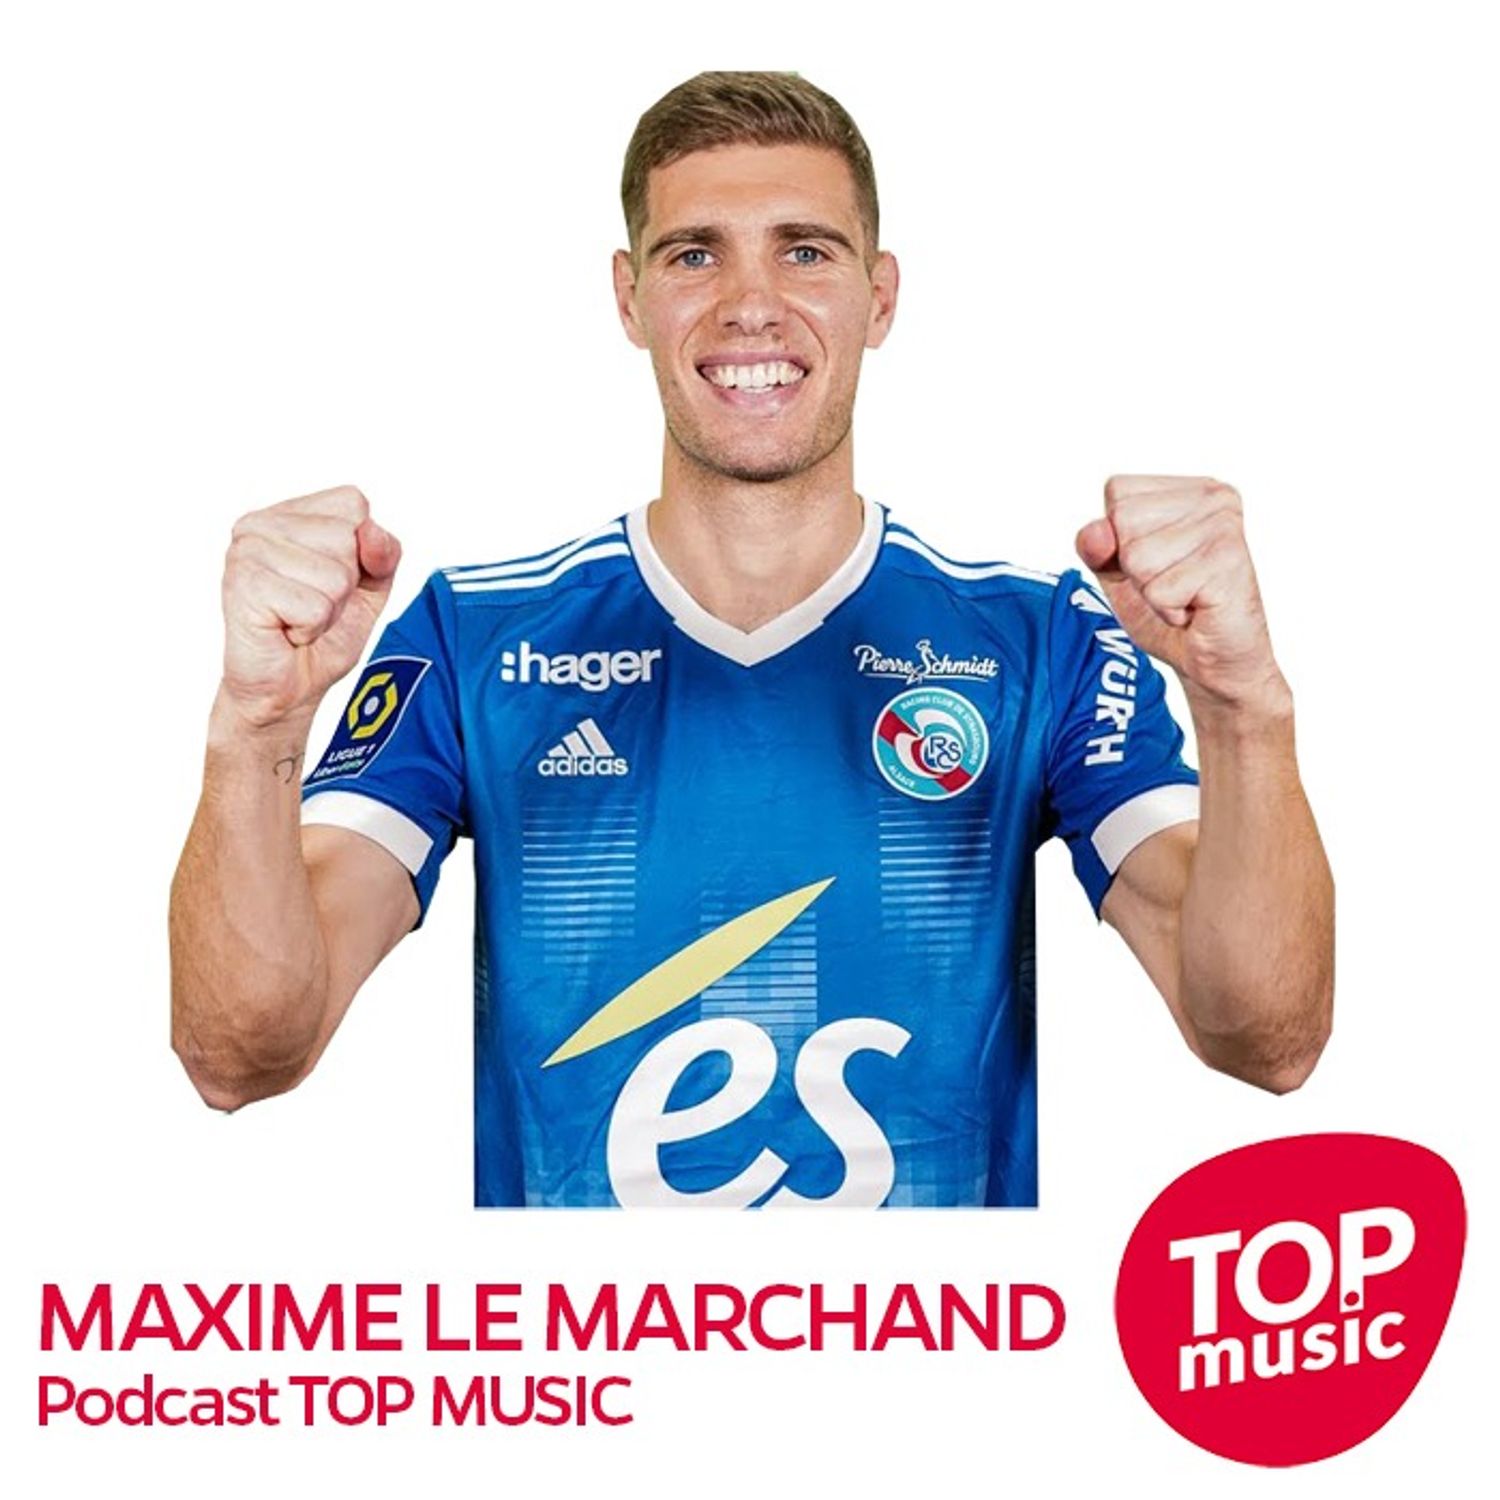 Podcast - Maxime Le Marchand